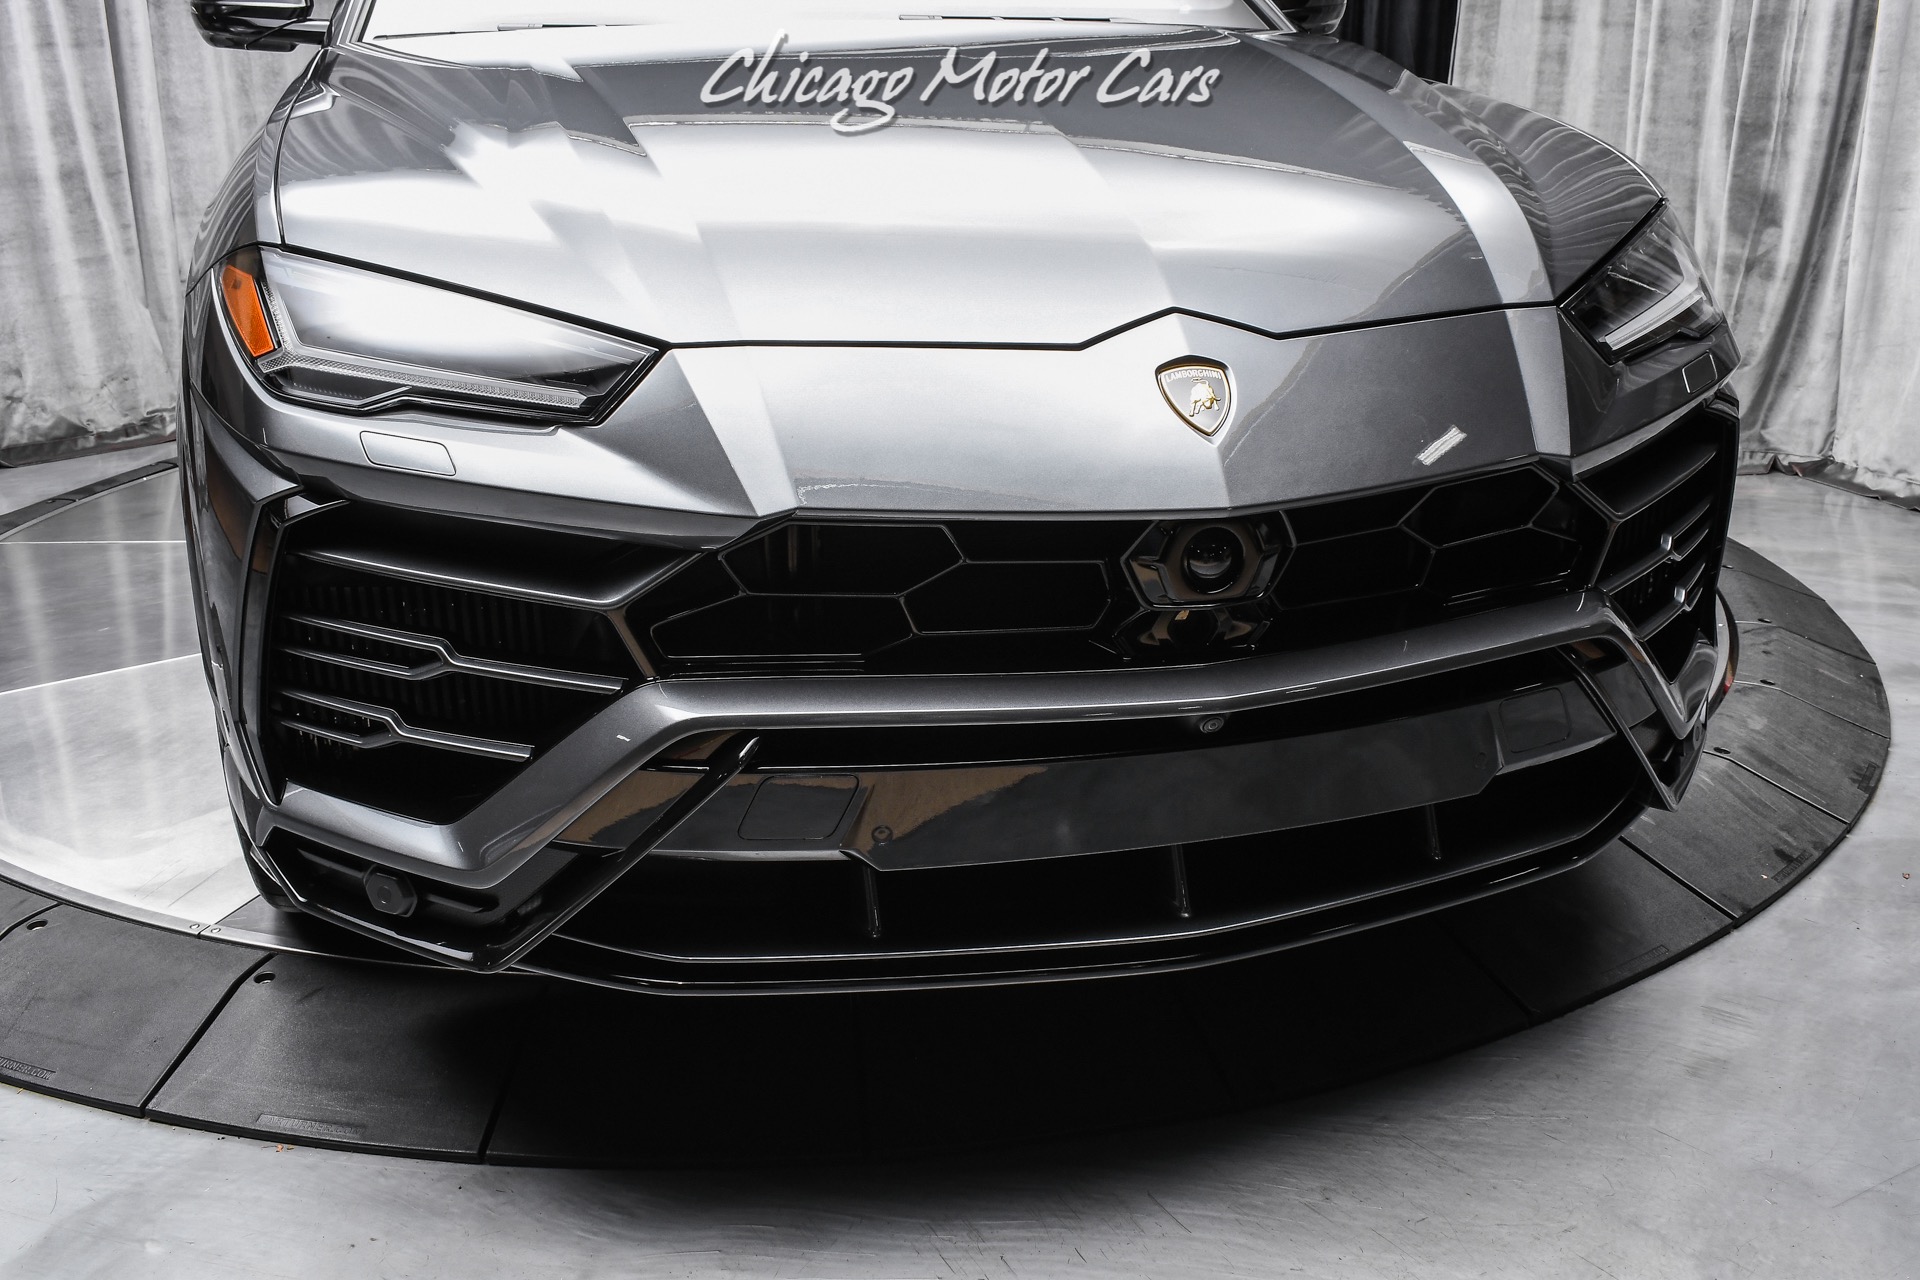 Used 2019 Lamborghini Urus SUV MSRP $260k+ Only 4k Miles HARD LOADED  Perfect! For Sale (Special Pricing)